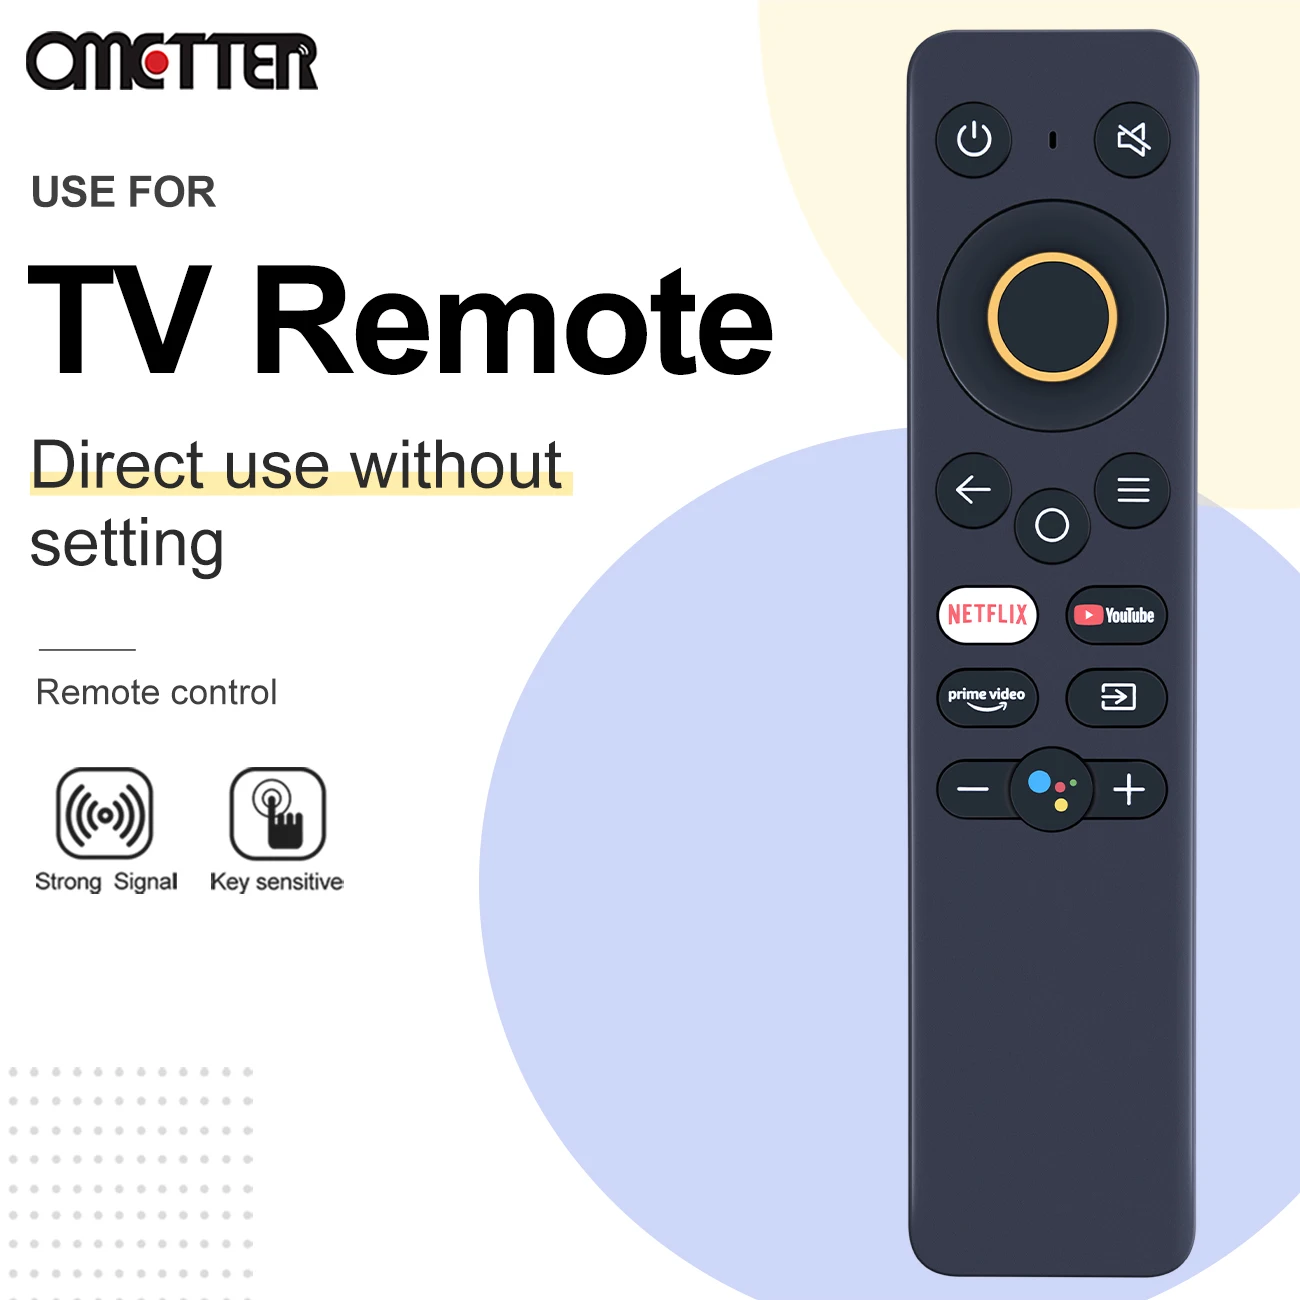 

Bluetooth Voice CY1710 for REALME Remote Control 43 32 Inch Smart TV Youtube Netflix Prime